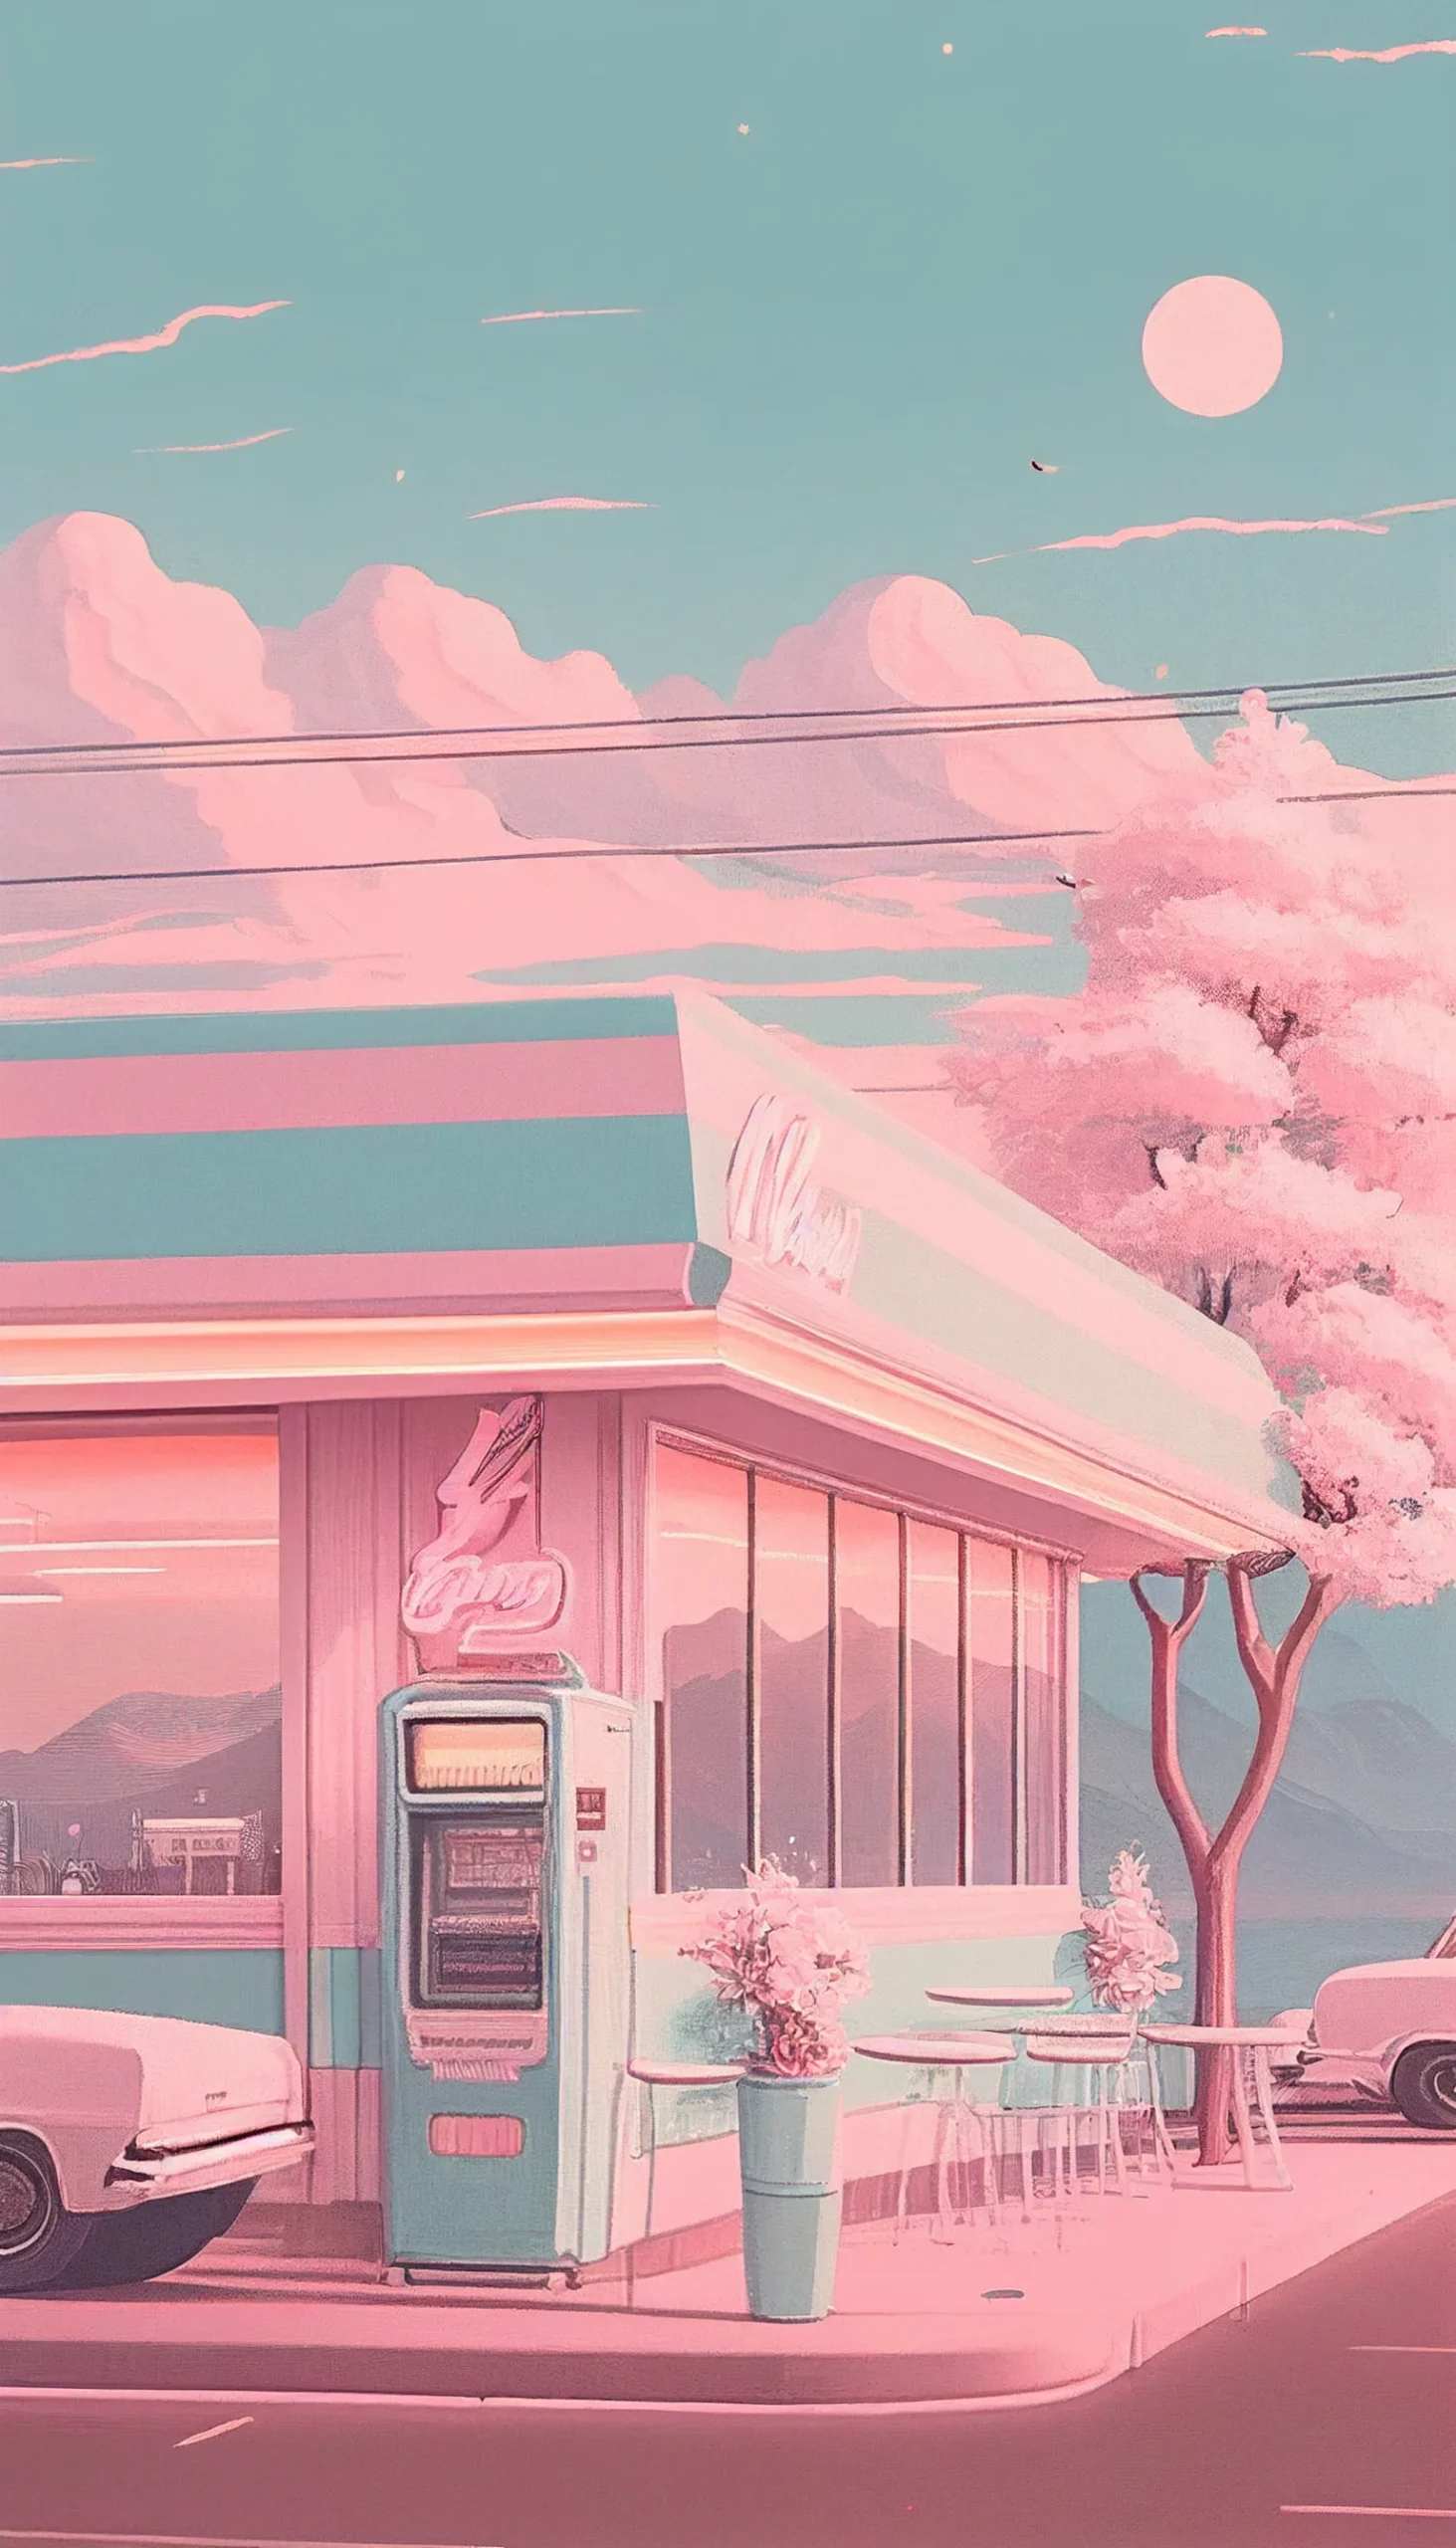 20 Stunning Pastel Aesthetic iPhone Wallpapers to Soothe Your Senses